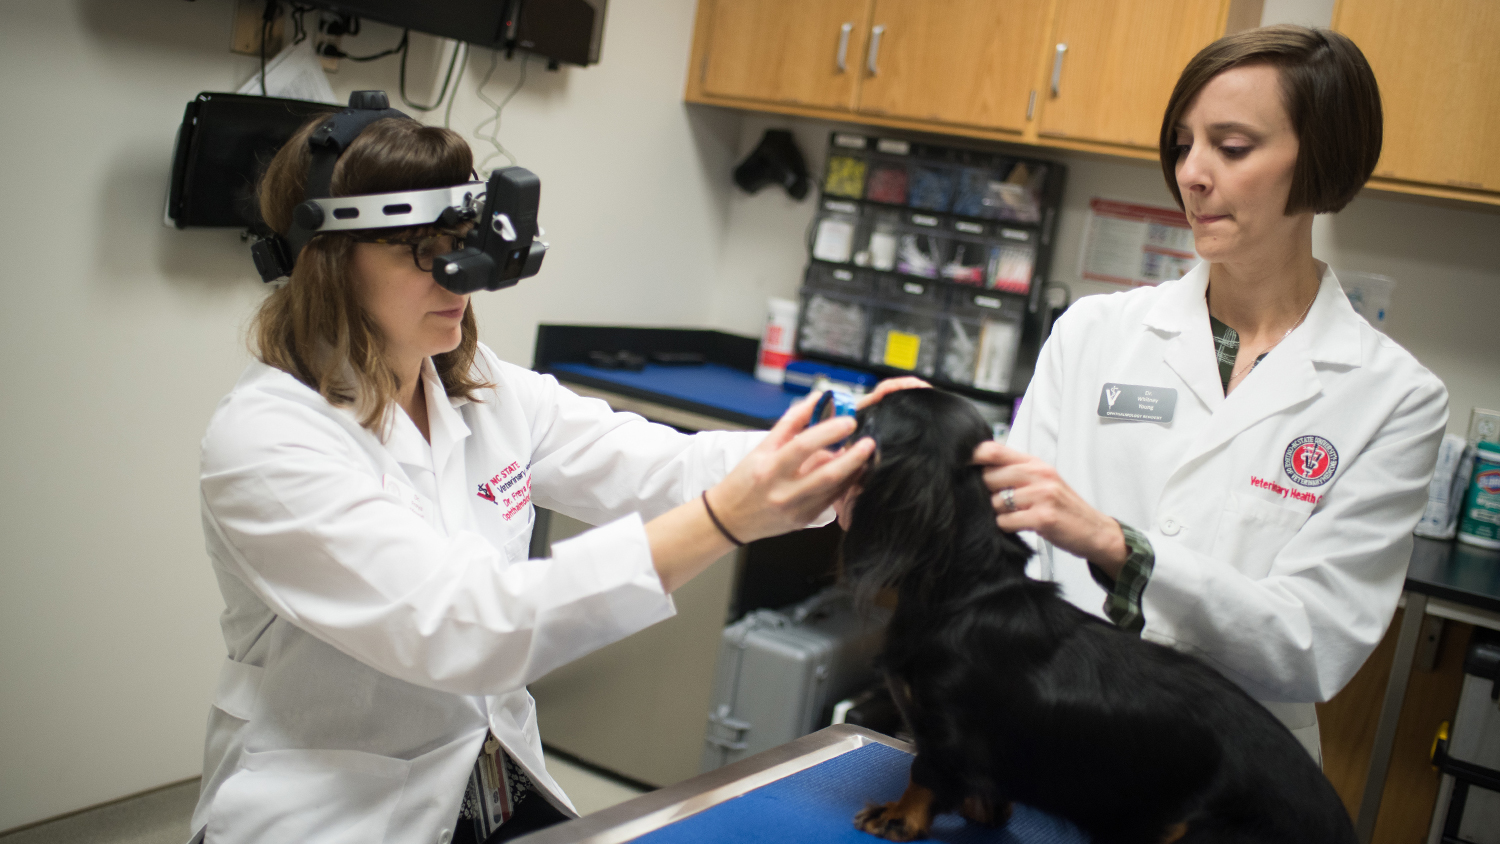 Getting a closer look at a dachsund patient.